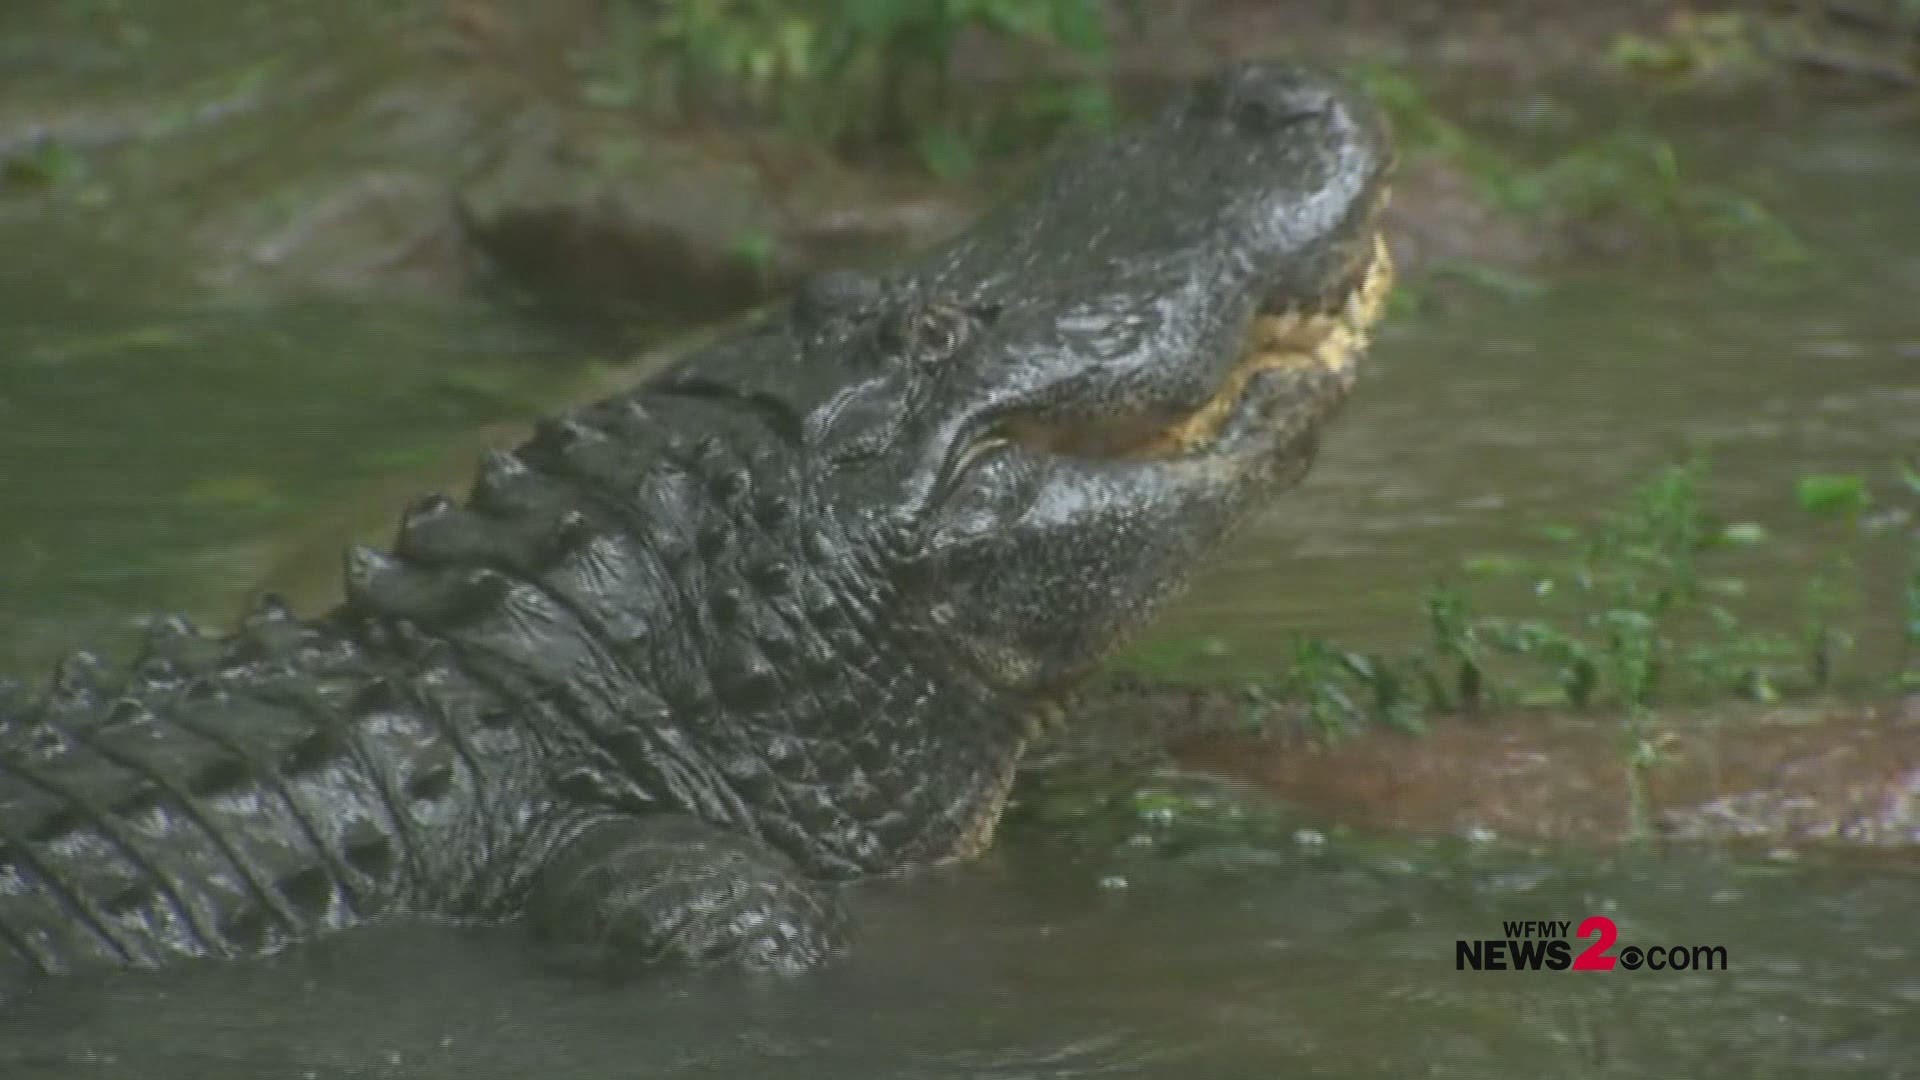 It's dinner time at the NC Zoo! Workers are busy feeding the alligators during Florence